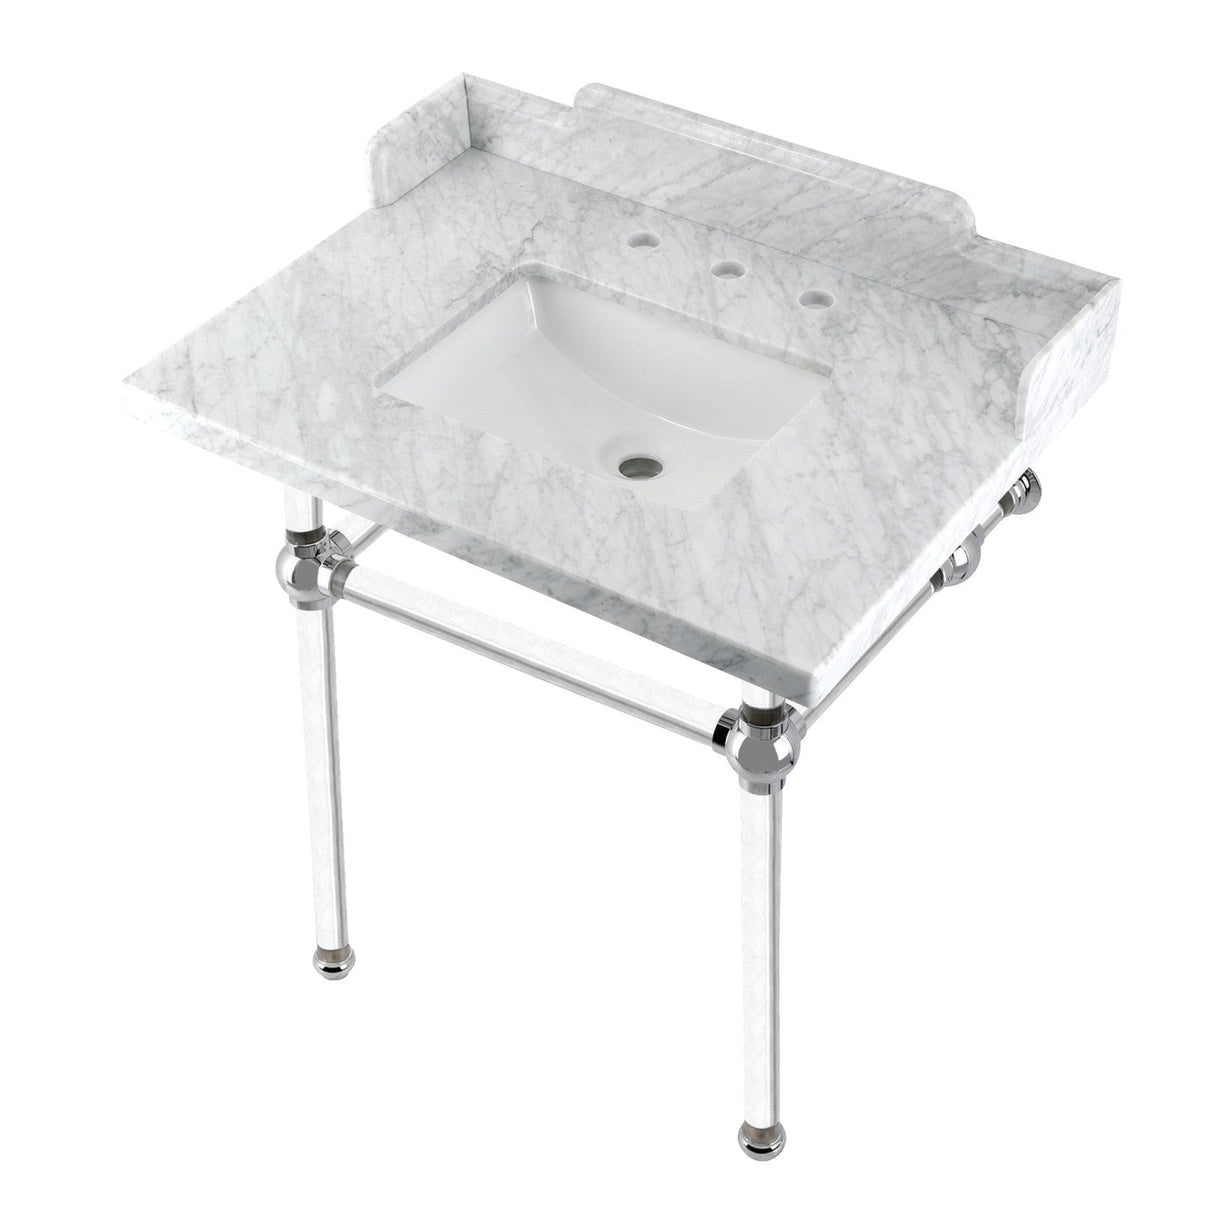 Fauceture LMS3030MASQ1 30-Inch Carrara Marble Console Sink with Acrylic Legs, Marble White/Polished Chrome